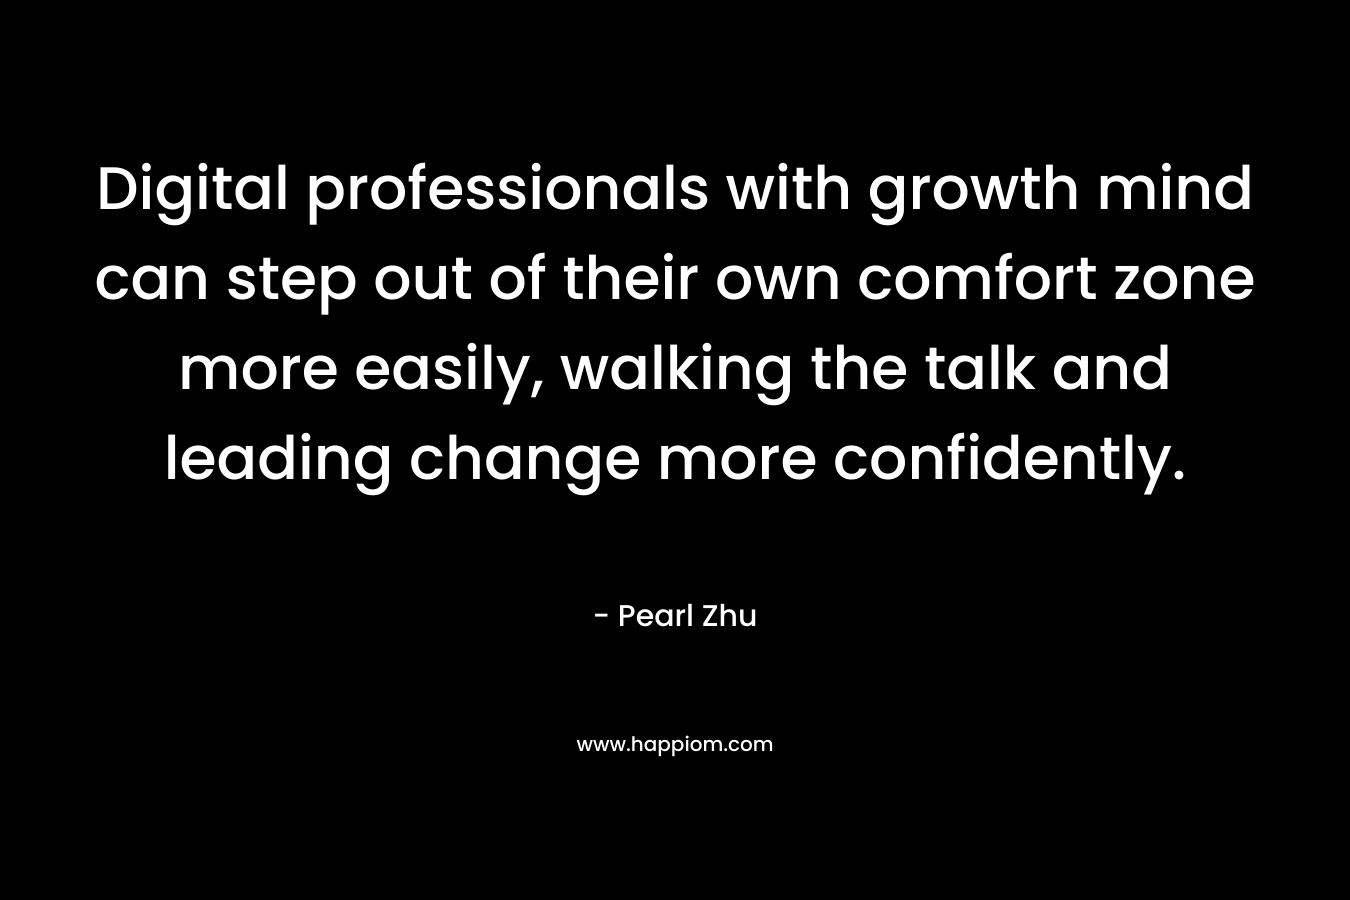 Digital professionals with growth mind can step out of their own comfort zone more easily, walking the talk and leading change more confidently. – Pearl Zhu